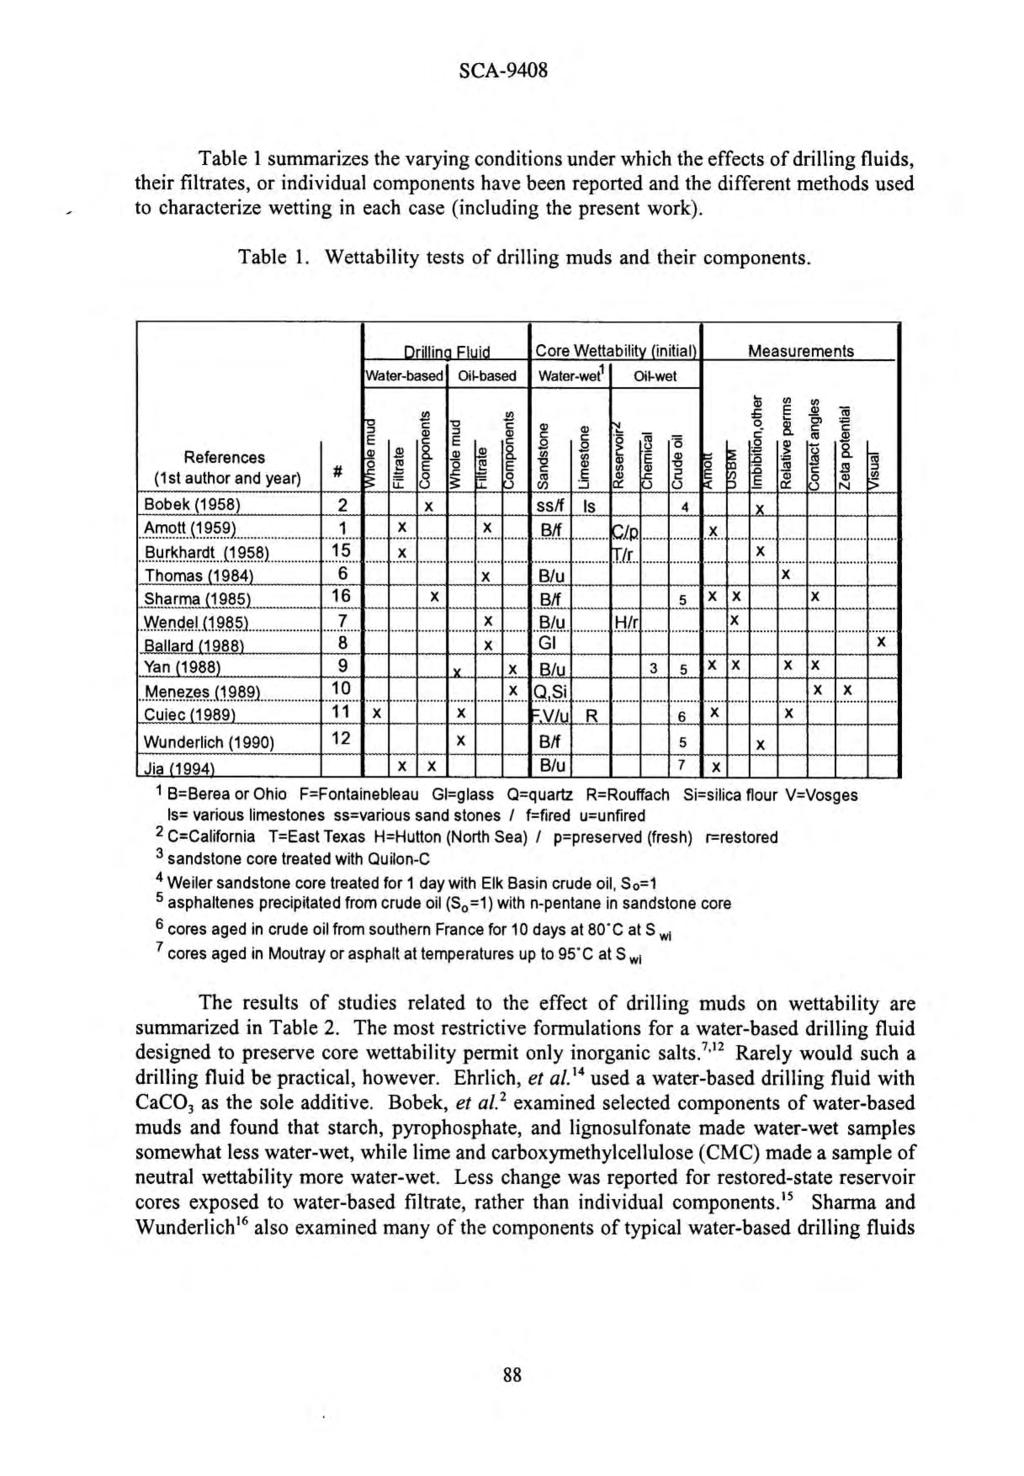 Table 1 summarizes the varying conditions under which the effects of drilling fluids, their filtrates, or individual components have been reported and the different methods used to characterize